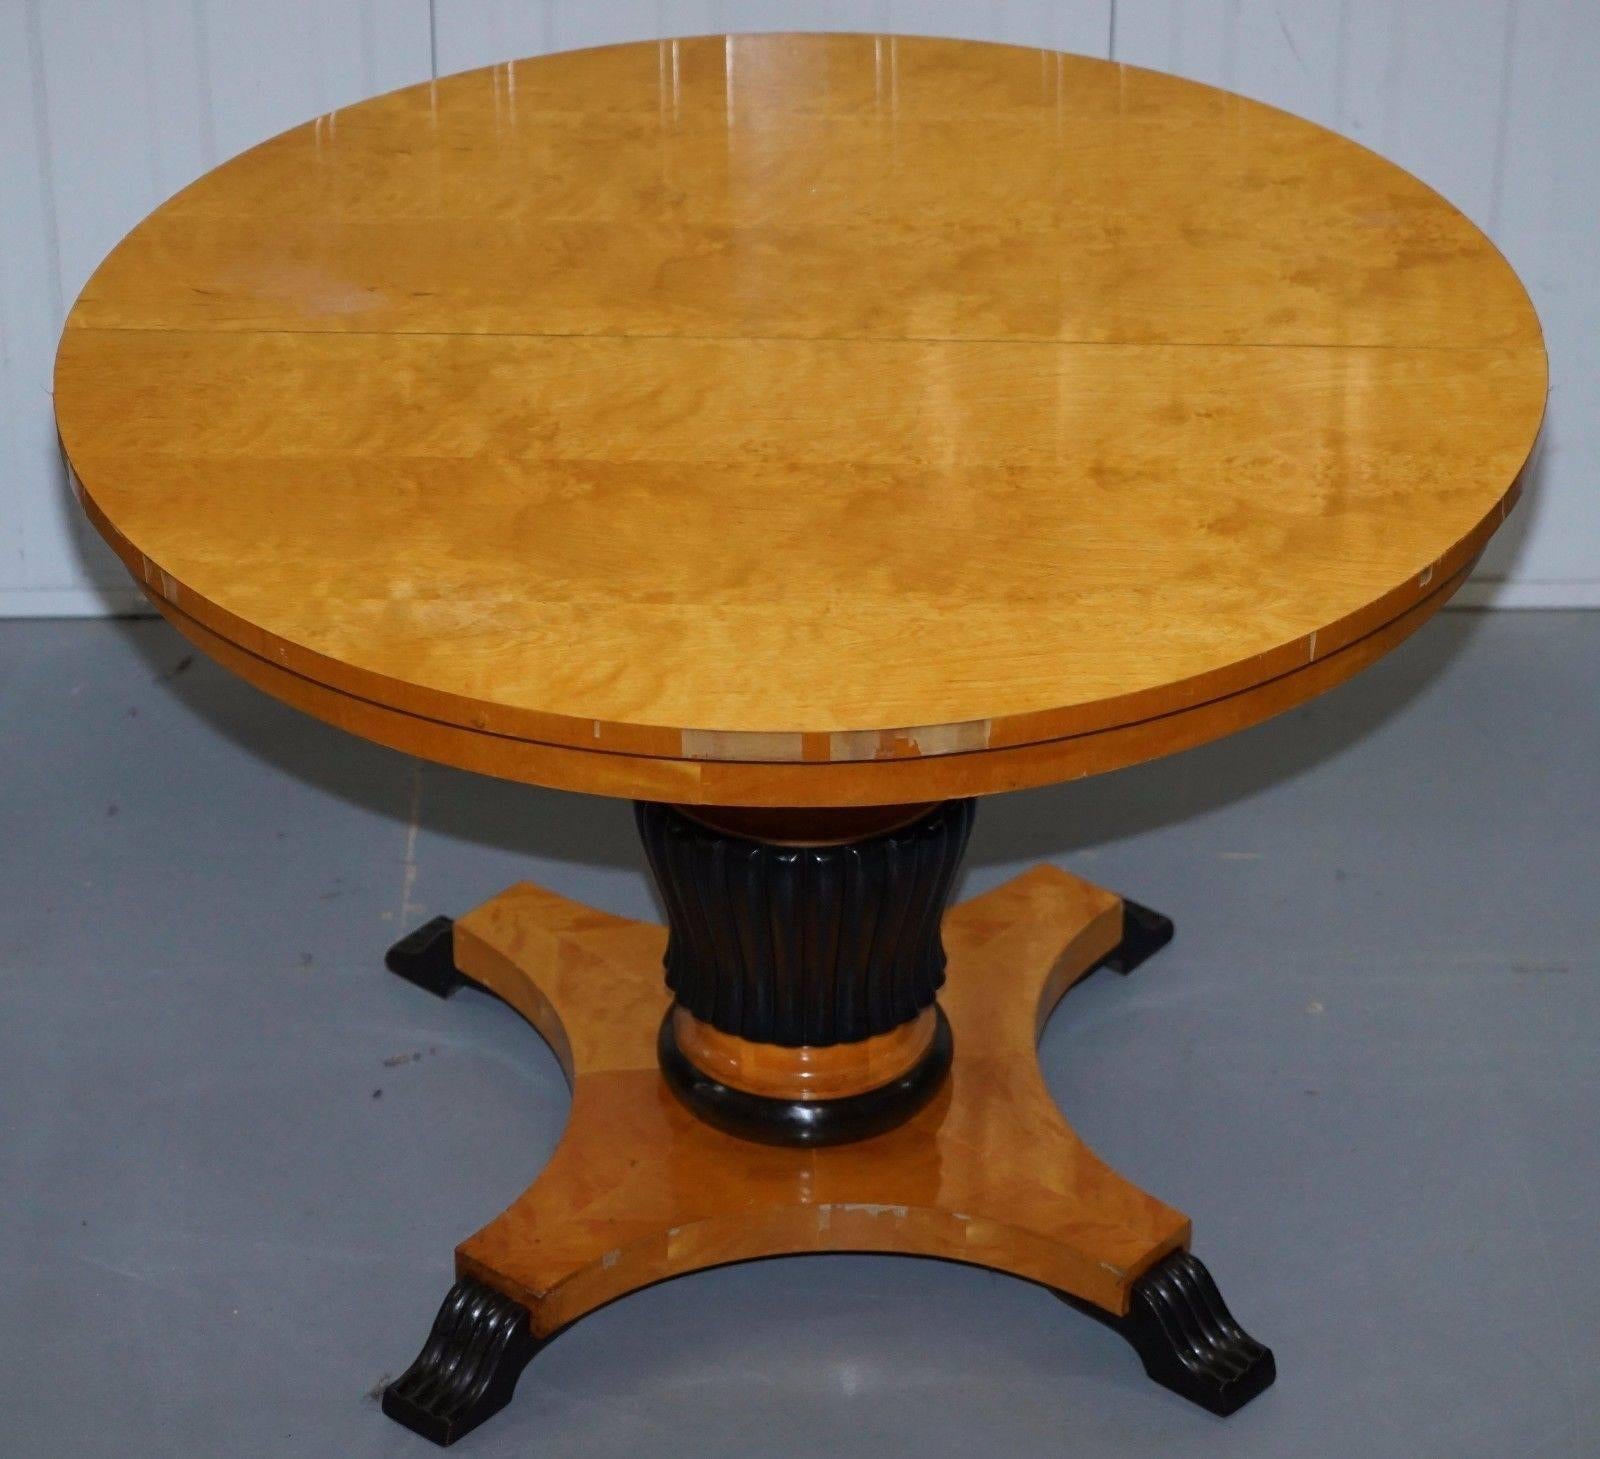 Wimbledon-Furniture

Wimbledon-Furniture is delighted to offer for sale this stunning very rare height adjustable Biedermeier dining table

A very good looking piece, the top is raised by turning the whole surface and then tightened in place